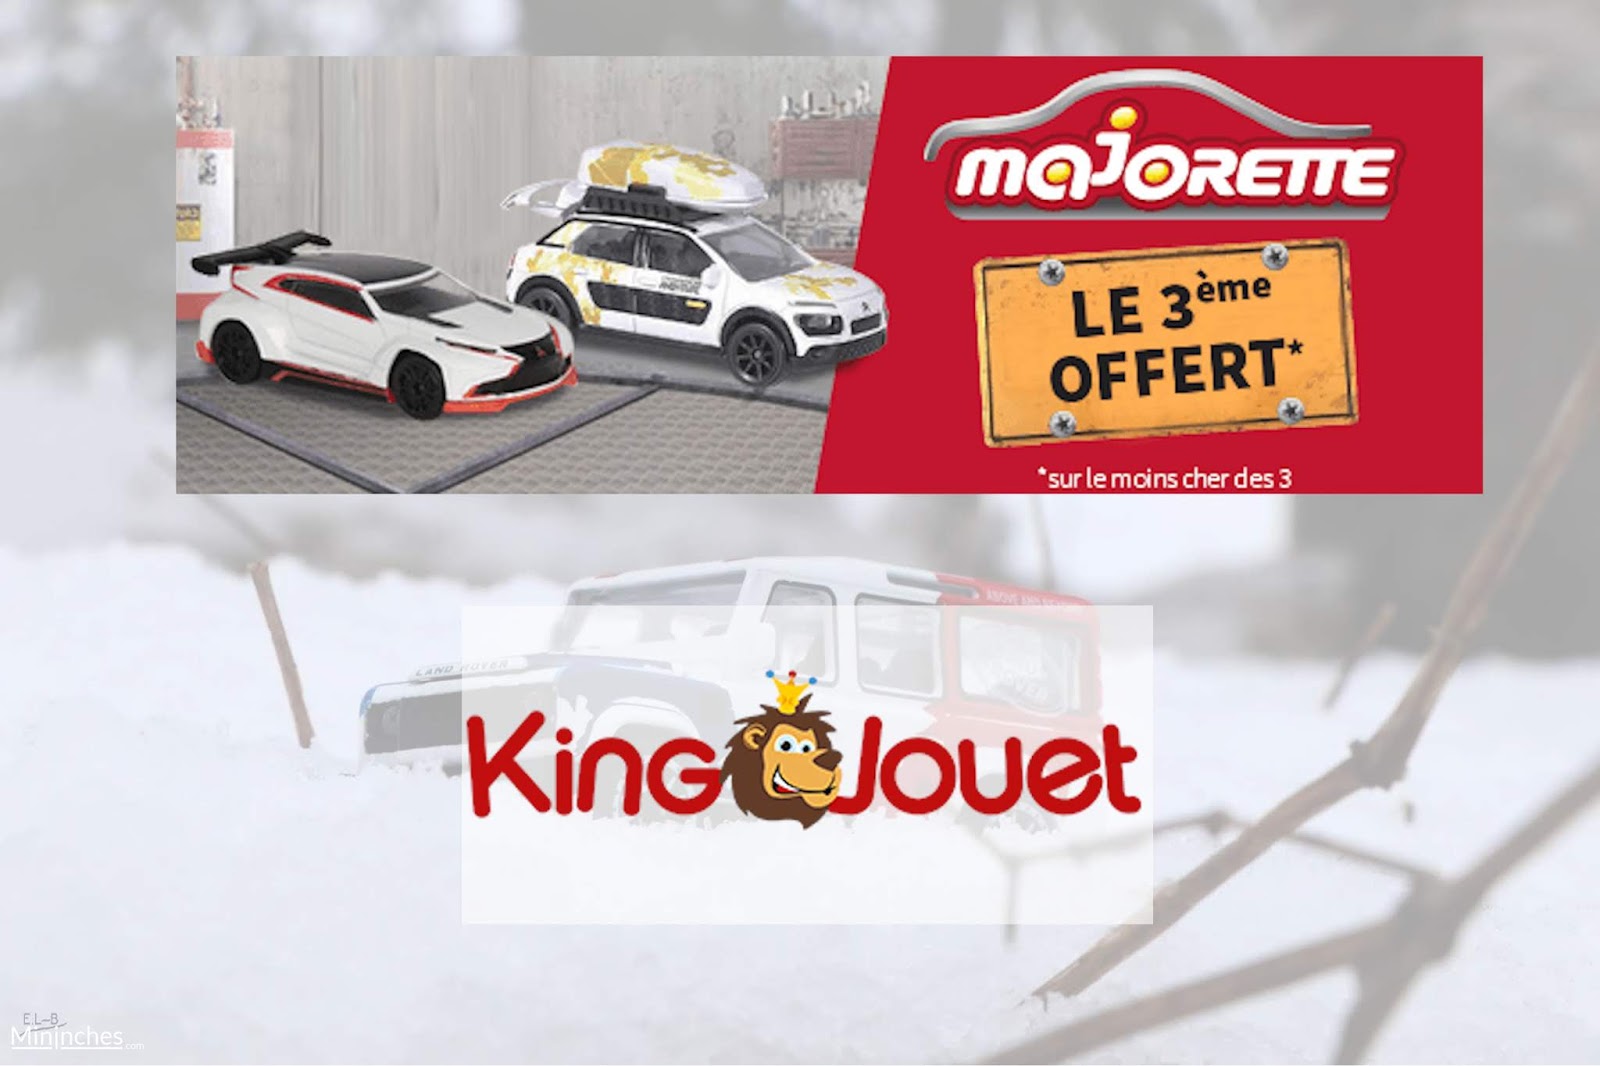 king jouet promo magasin